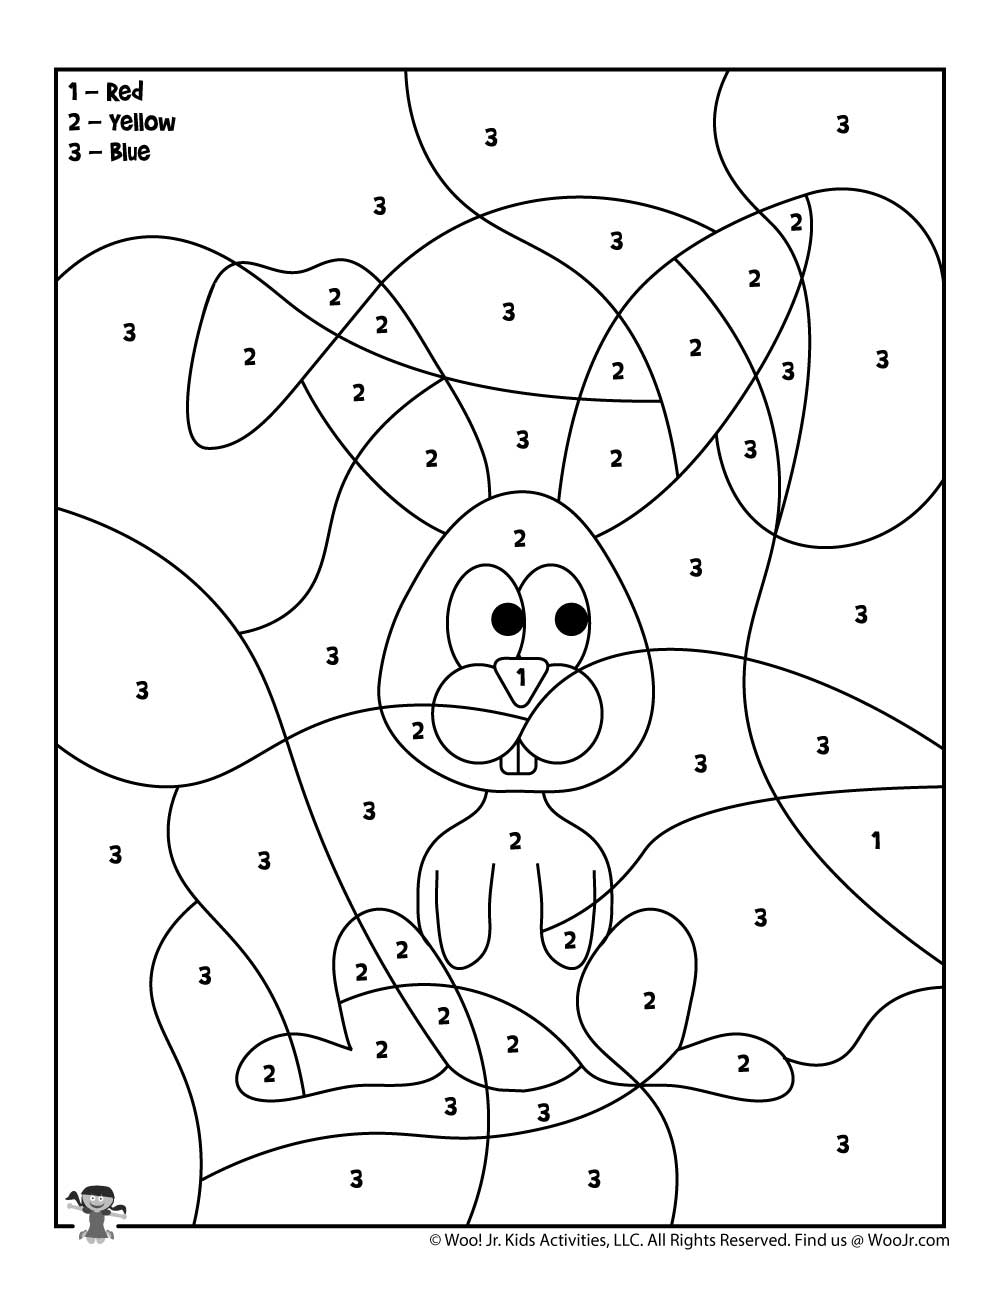 Bunny Free Printable Color by Number Page | Woo! Jr. Kids Activities :  Children's Publishing